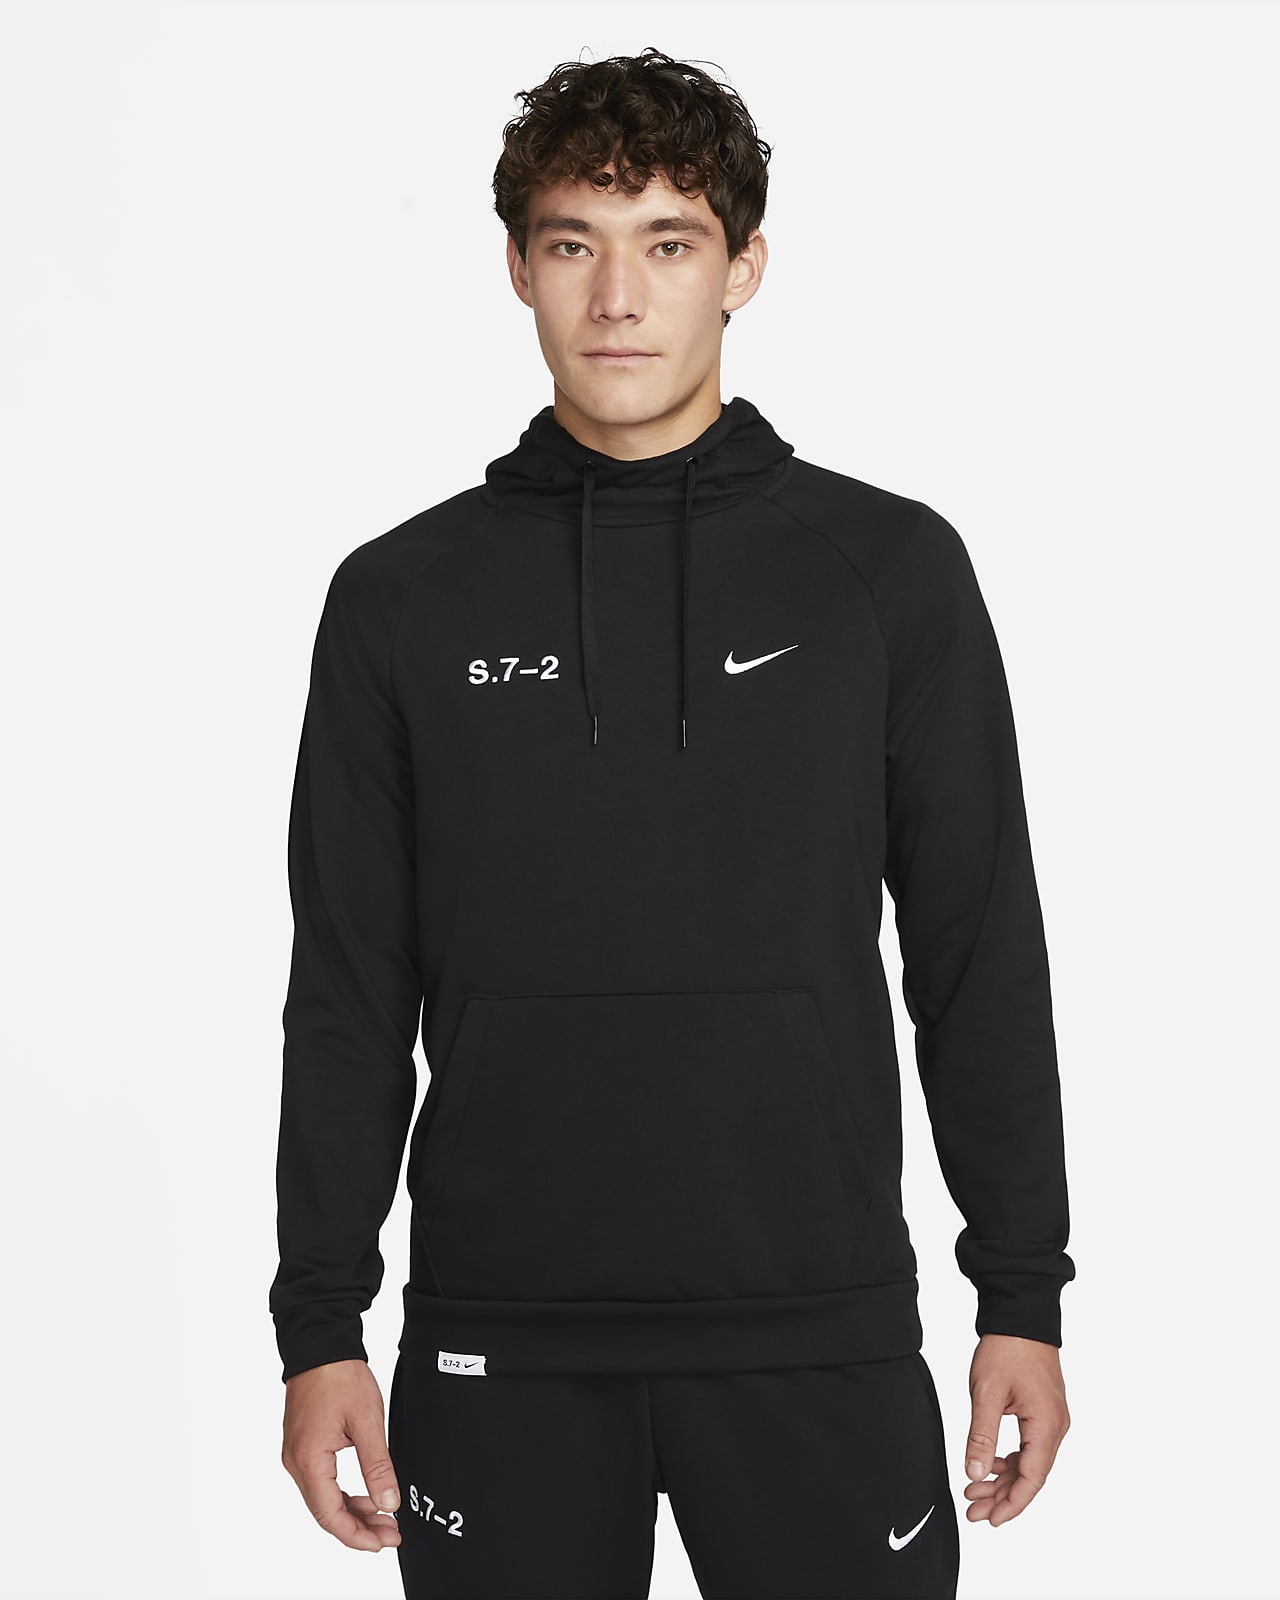 https://static.nike.com/a/images/t_PDP_1280_v1/f_auto,q_auto:eco/9e052178-a33c-46a7-9c36-3c764d2f1b01/dri-fit-studio-72-pullover-fitness-hoodie-Tvrdqh.png